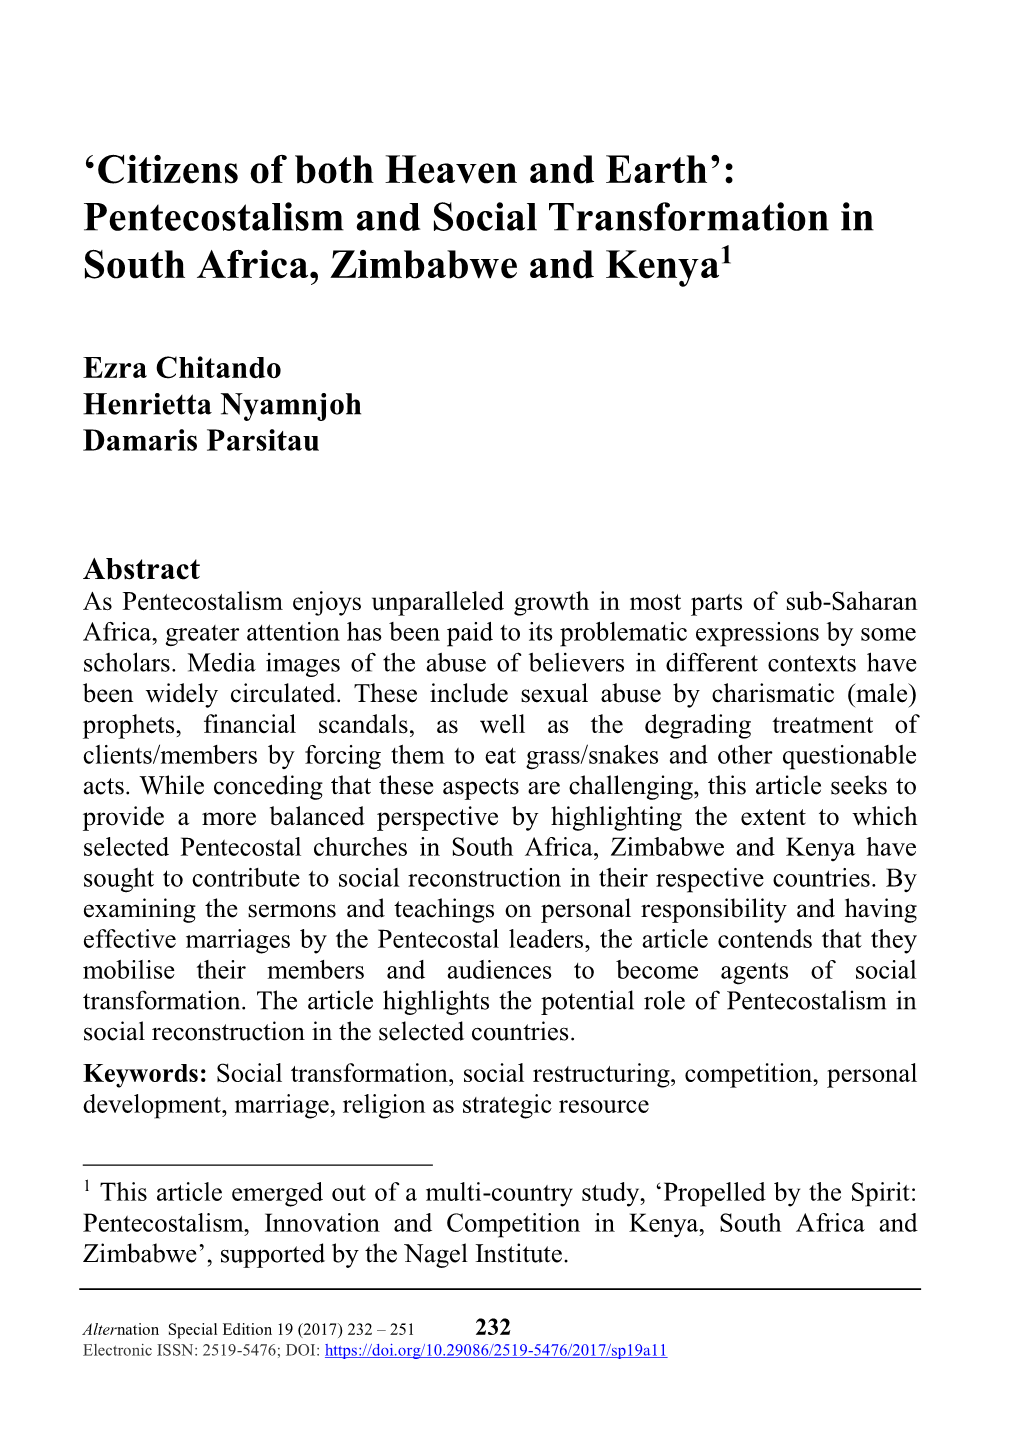 'Citizens of Both Heaven and Earth': Pentecostalism and Social Transformation in South Africa, Zimbabwe and Kenya1